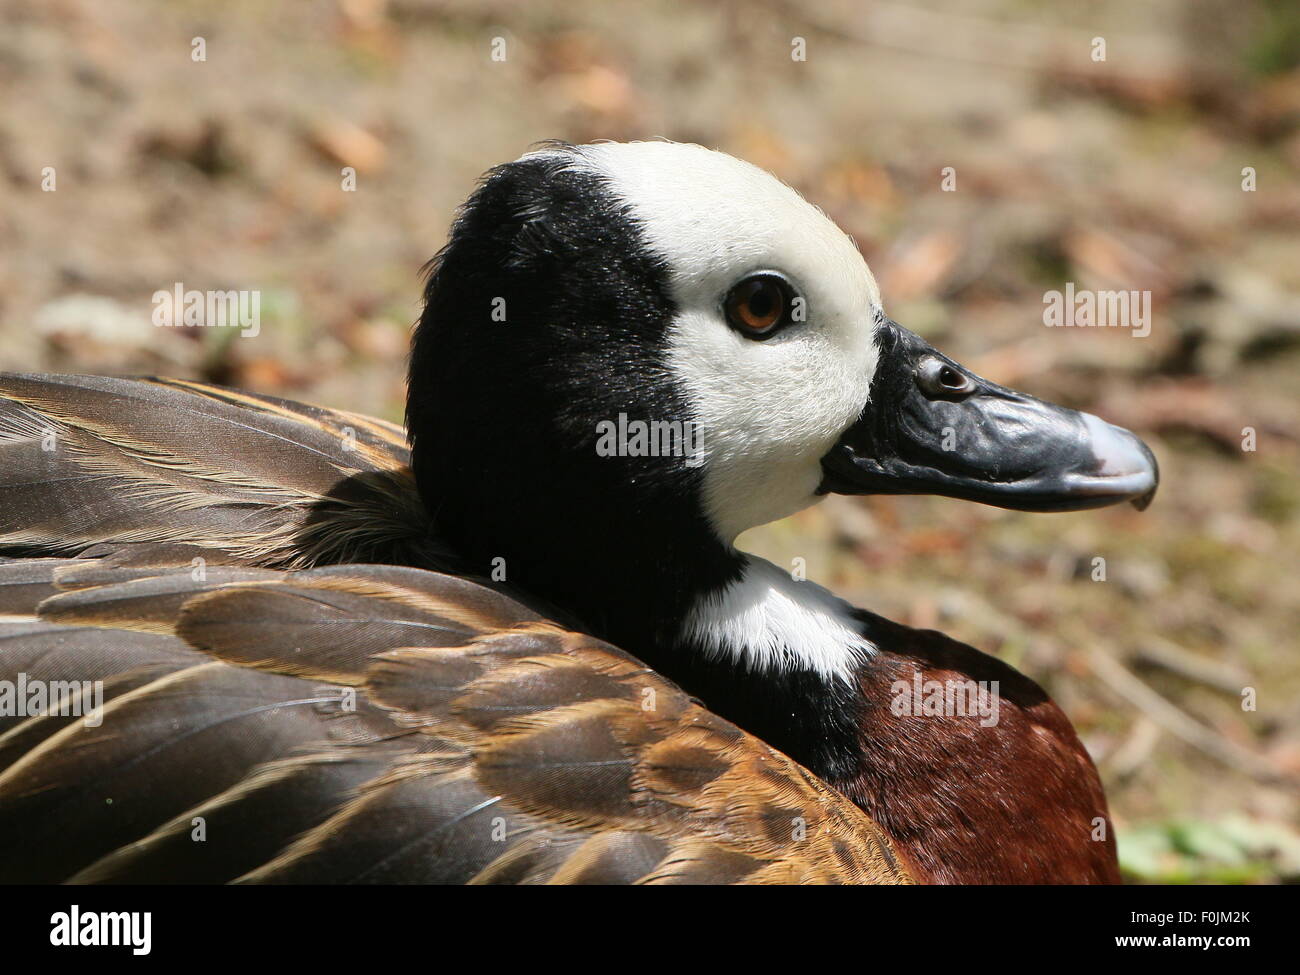 Closeup of the head of a White-faced whistling duck (Dendrocygna viduata), native to sub-Saharan Africa & South America. Stock Photo